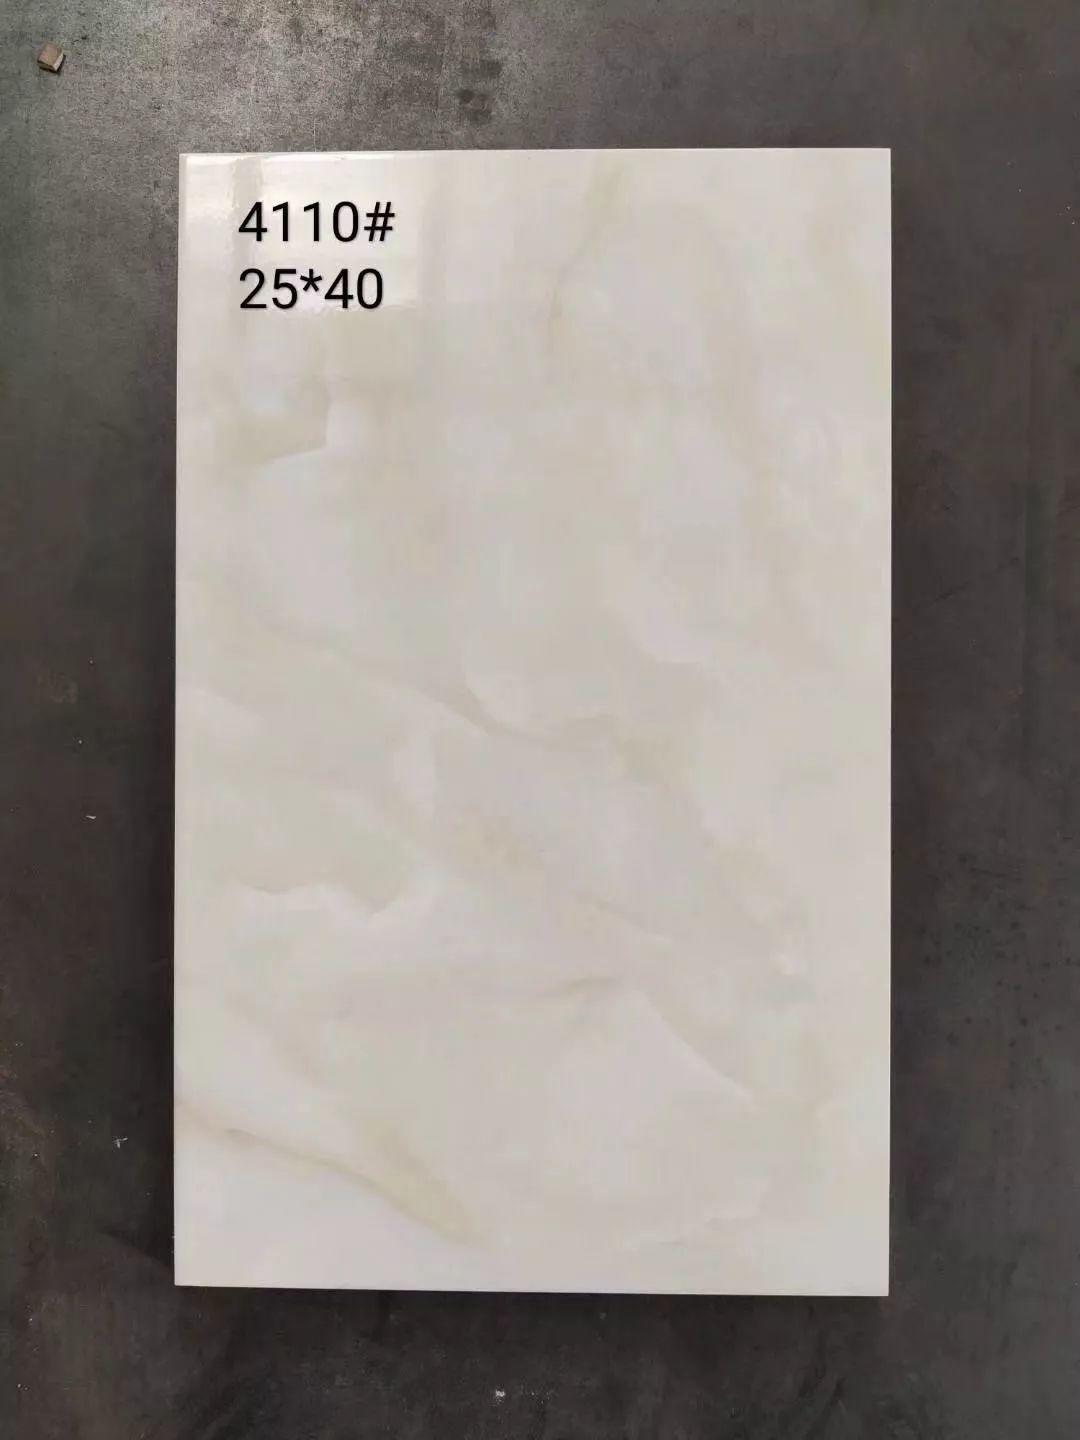 check some good quality & cheap ceramic tiles here!